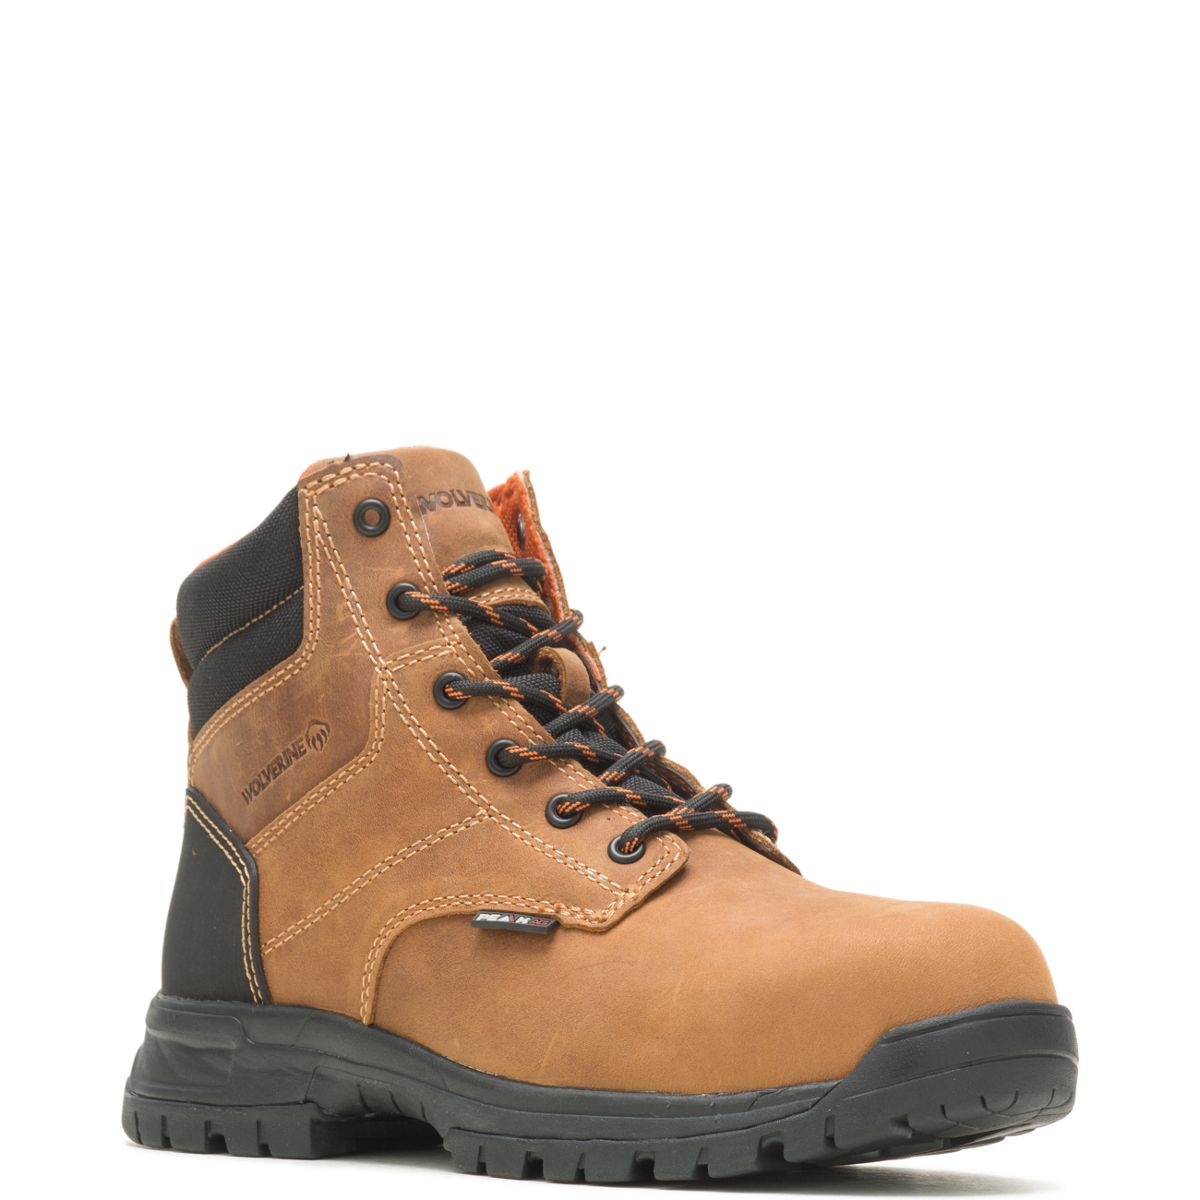 Piper 6" Composite-Toe Work Boot, Brown, dynamic 2